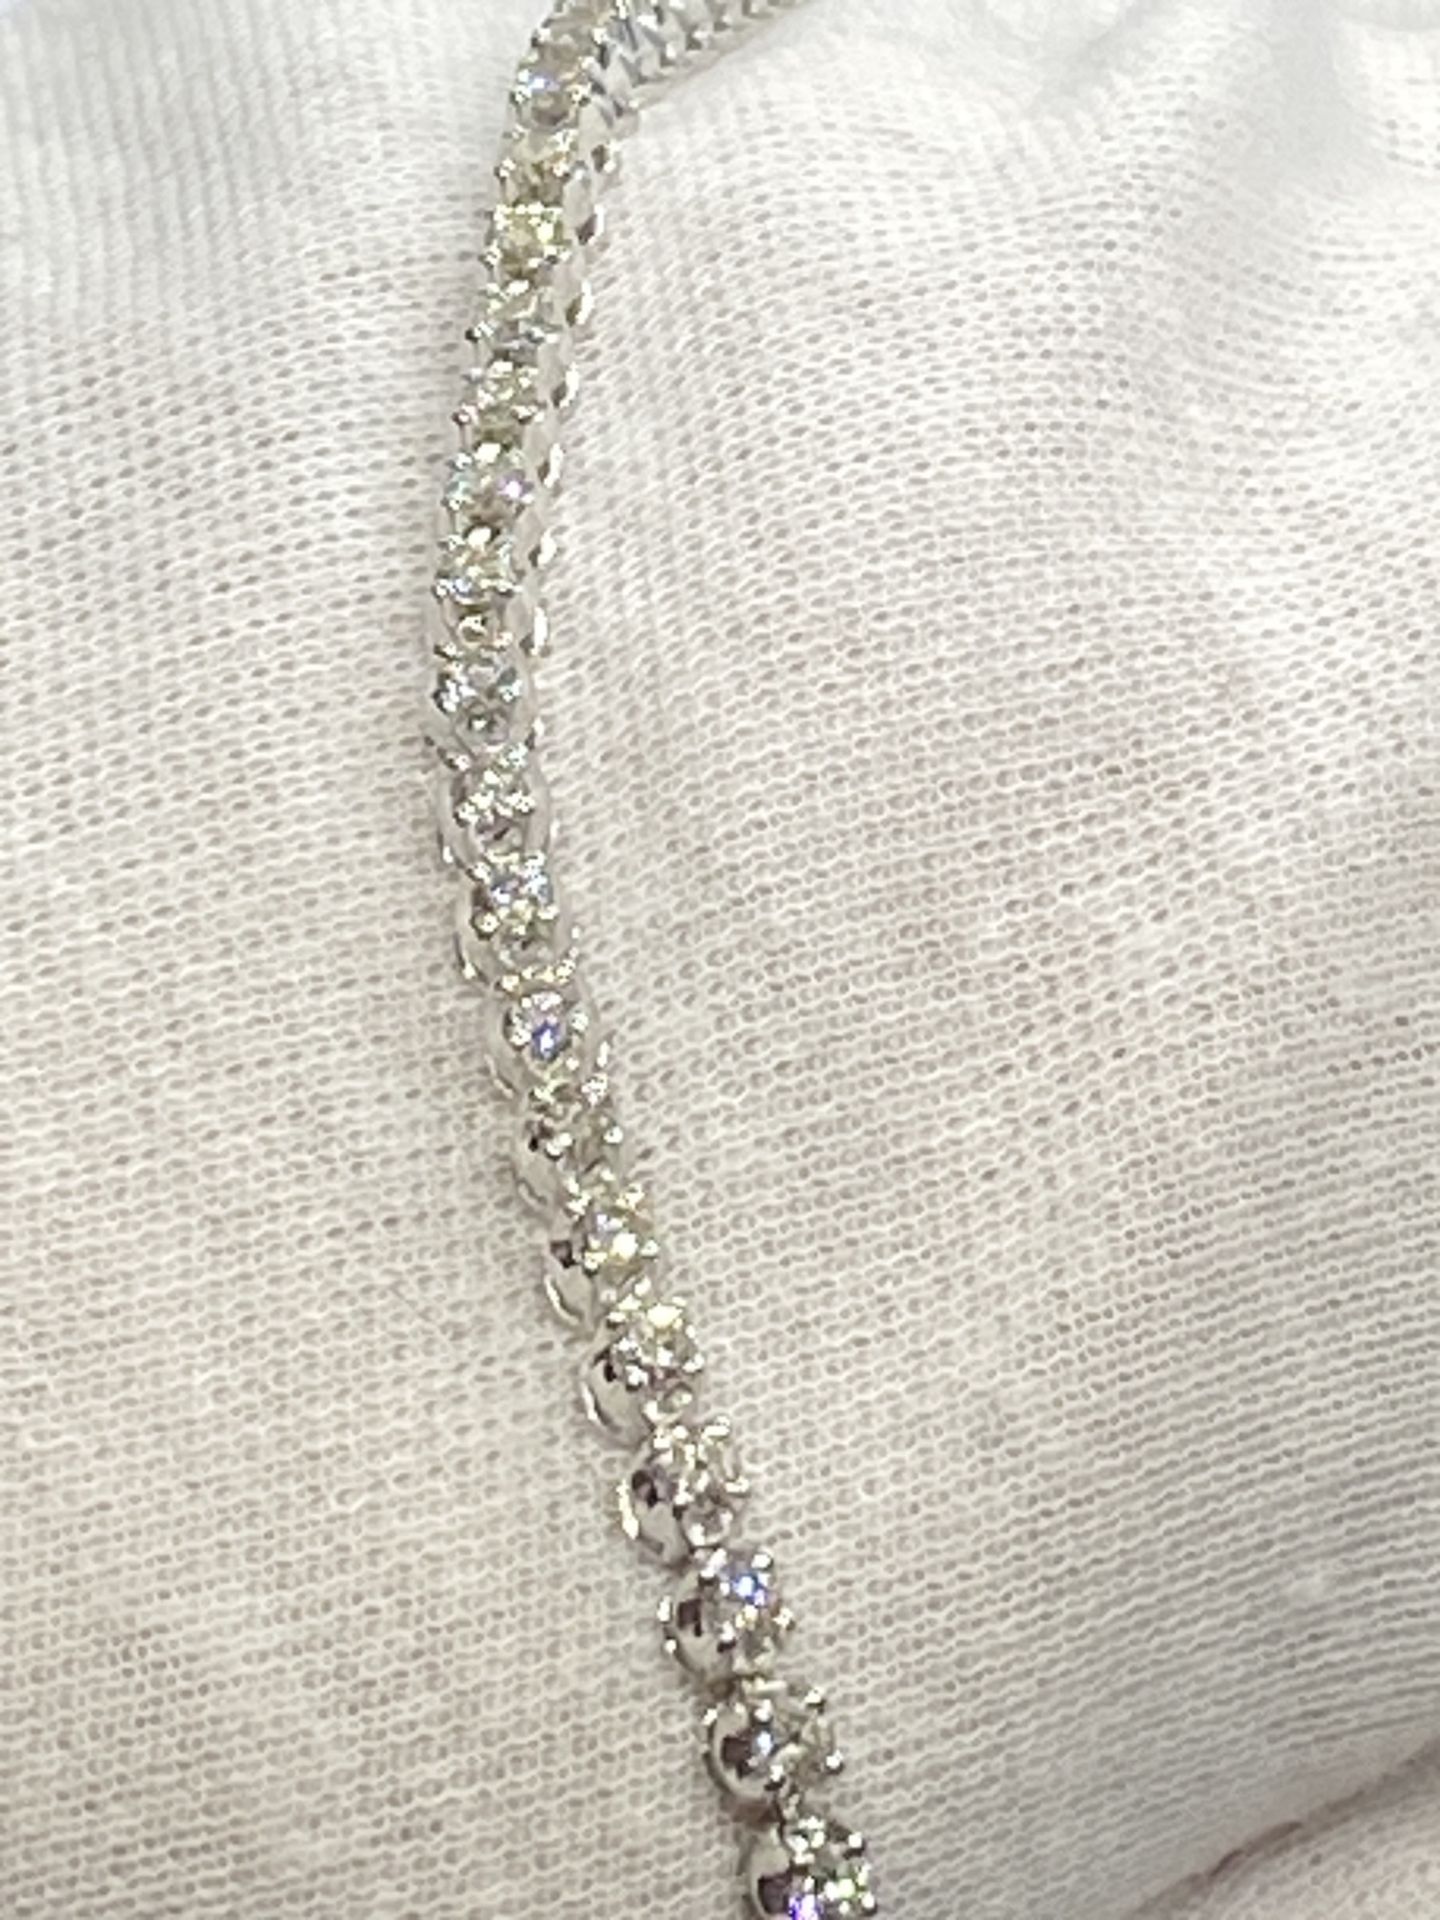 4.00ct NATURAL DIAMOND TENNIS BRACELET SET WHITE GOLD - F/G/H SI1 WITH £5800 INSURANCE VALUATION